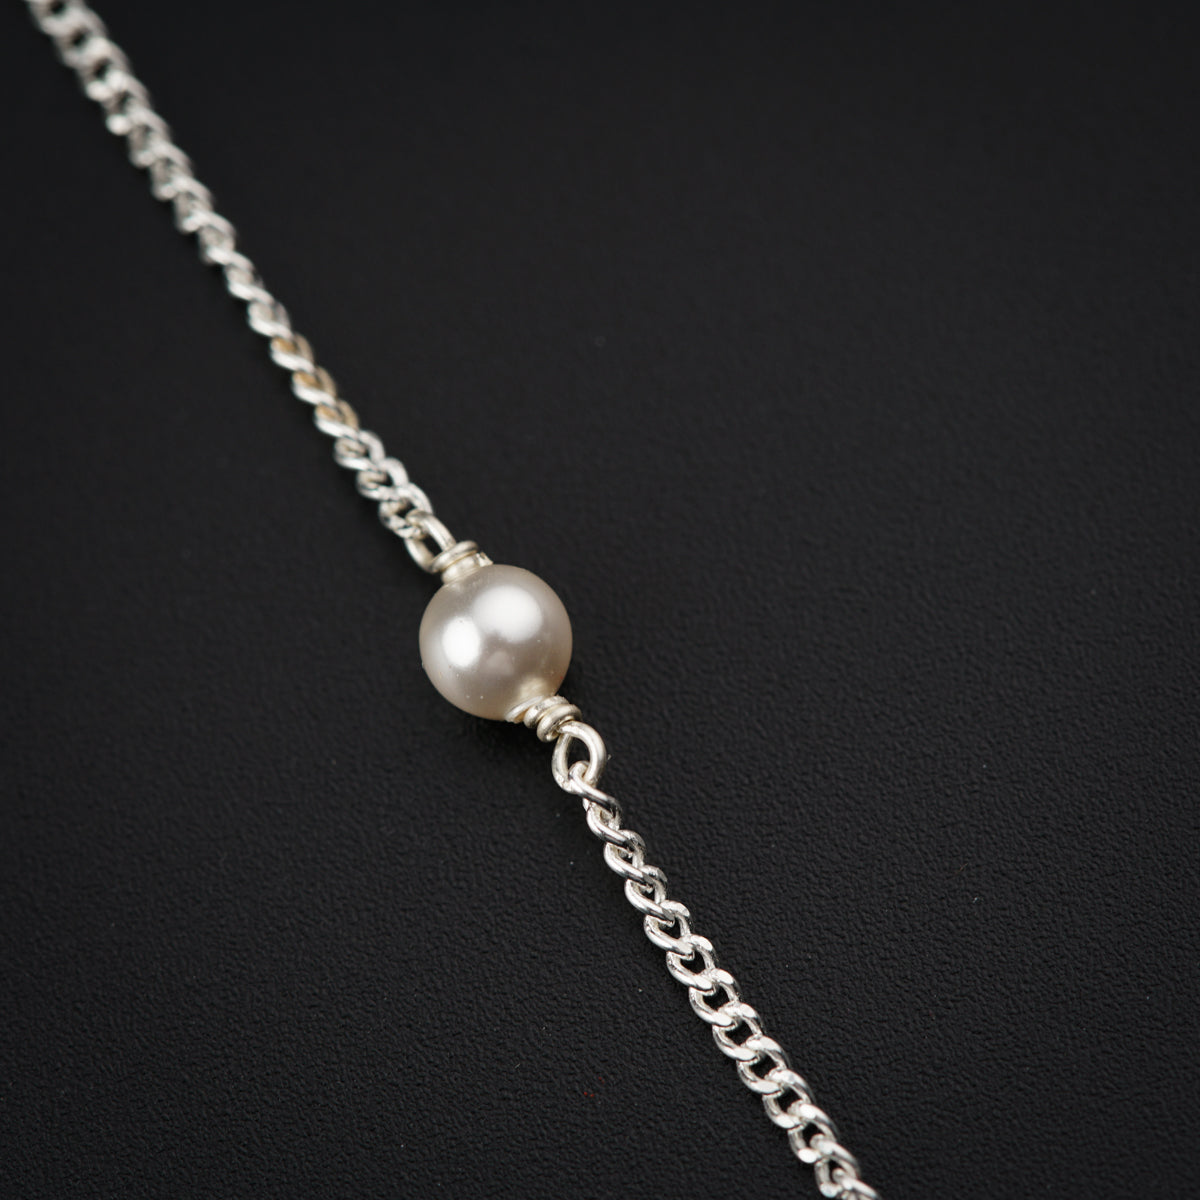 a necklace with a white pearl on a chain